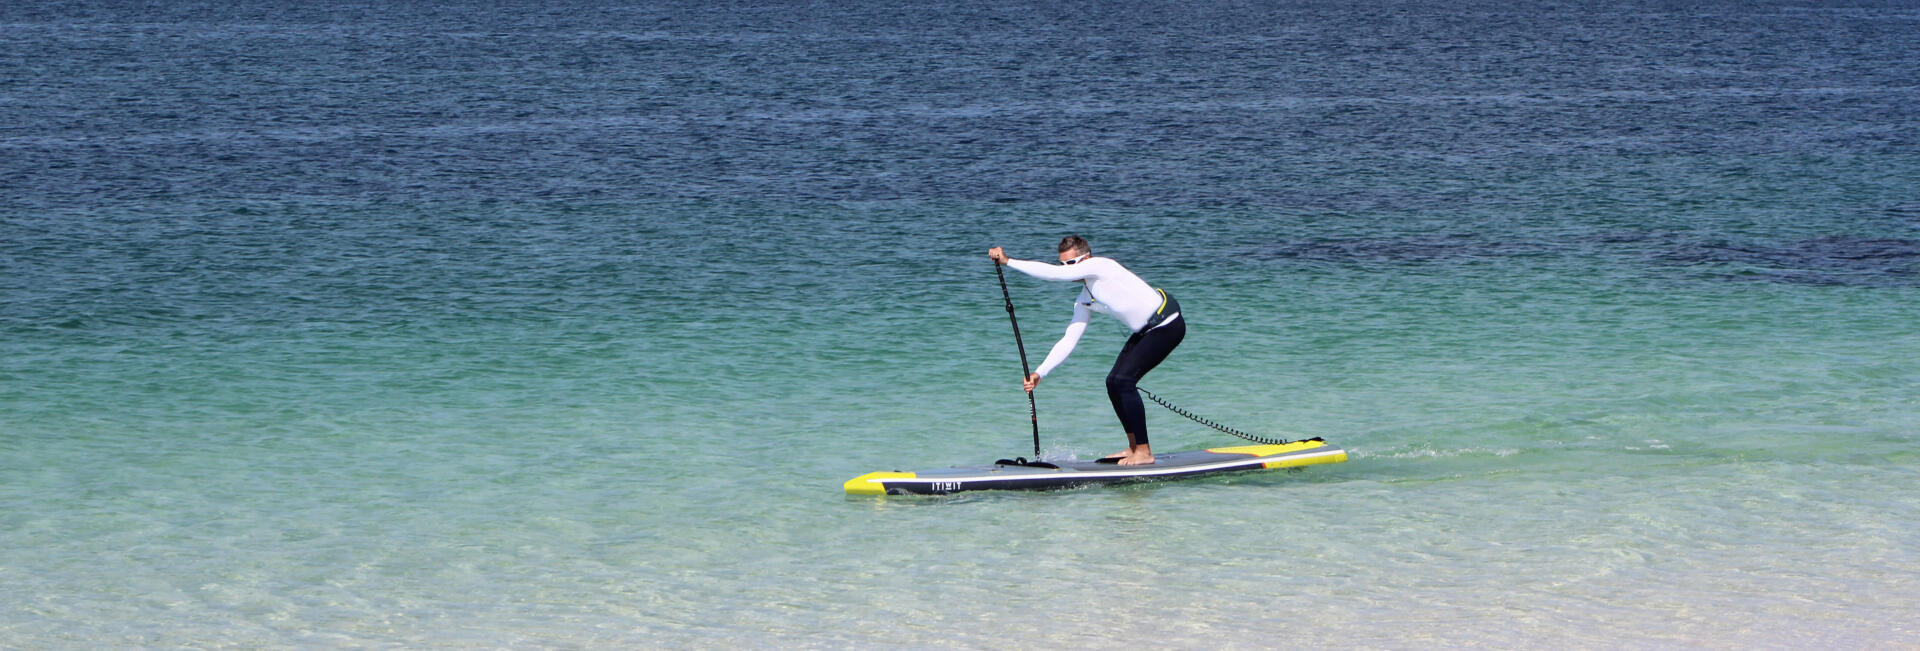 Stand-up paddle technique race